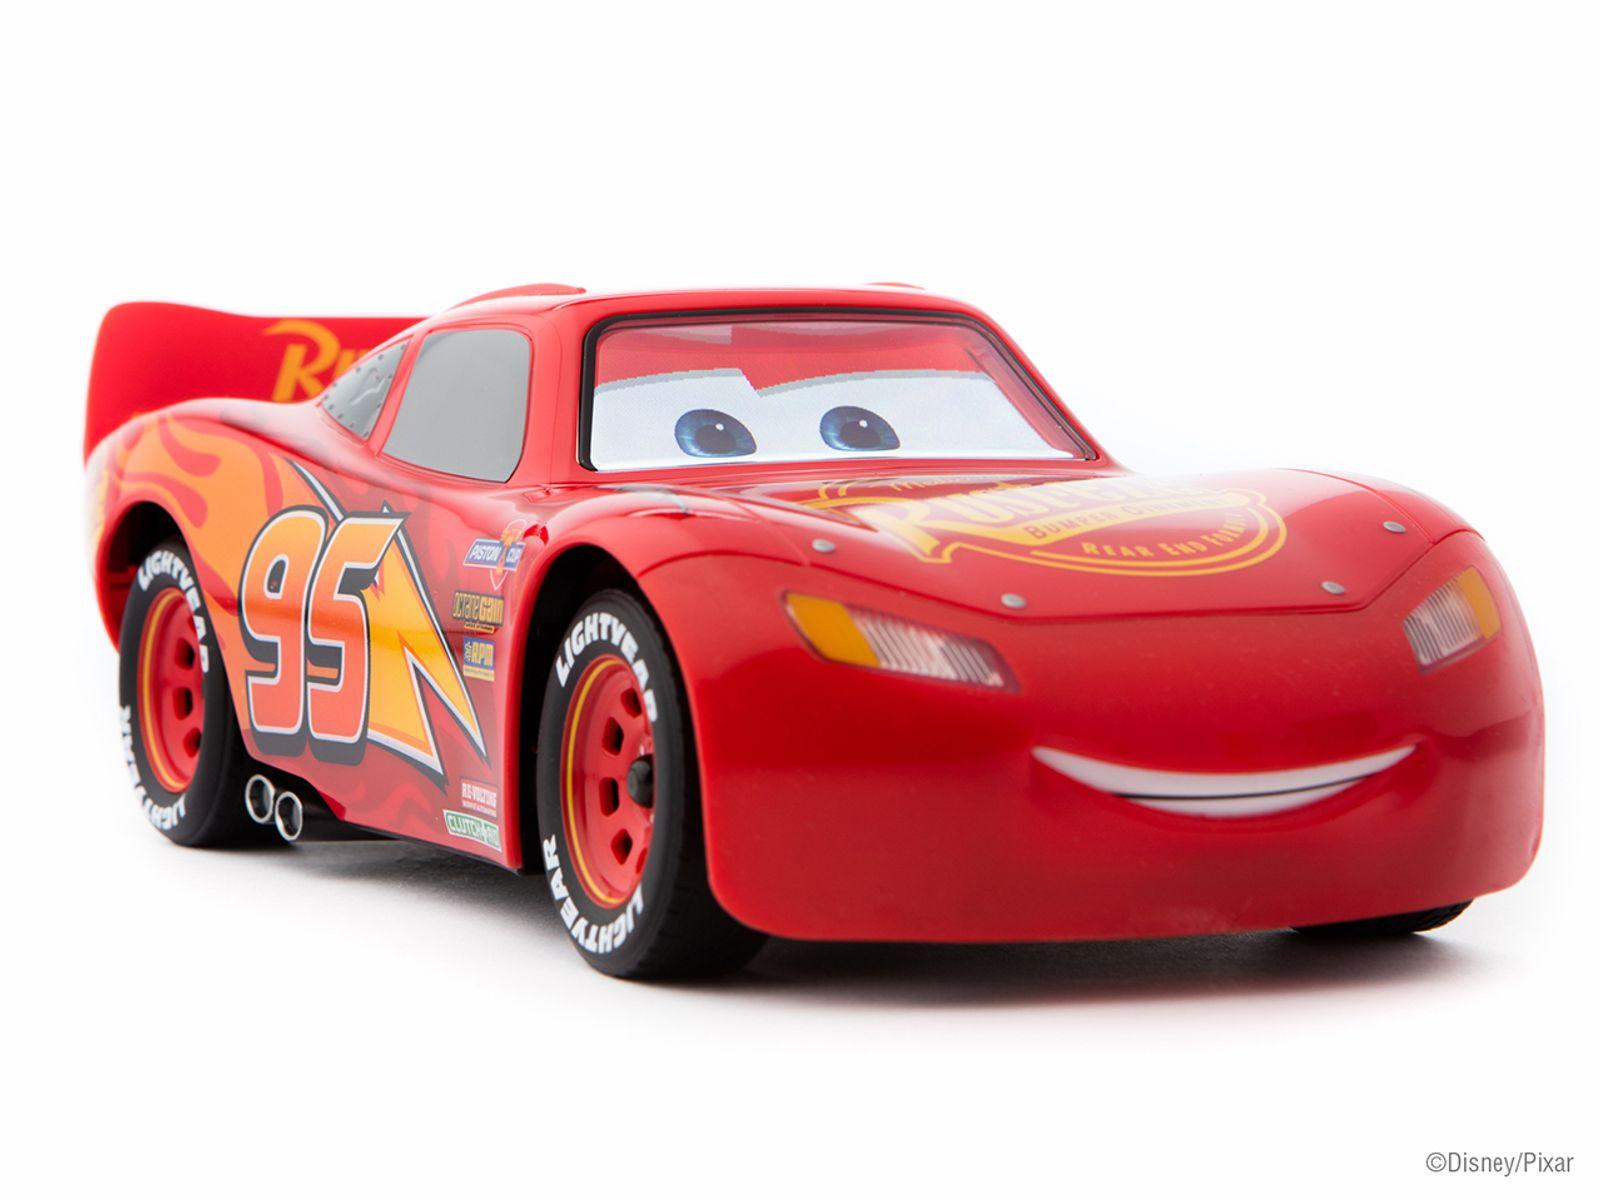 Lightning Mcqueen Remote Control Car: Stop: Considering the Different Features of Lightning McQueen RC Cars